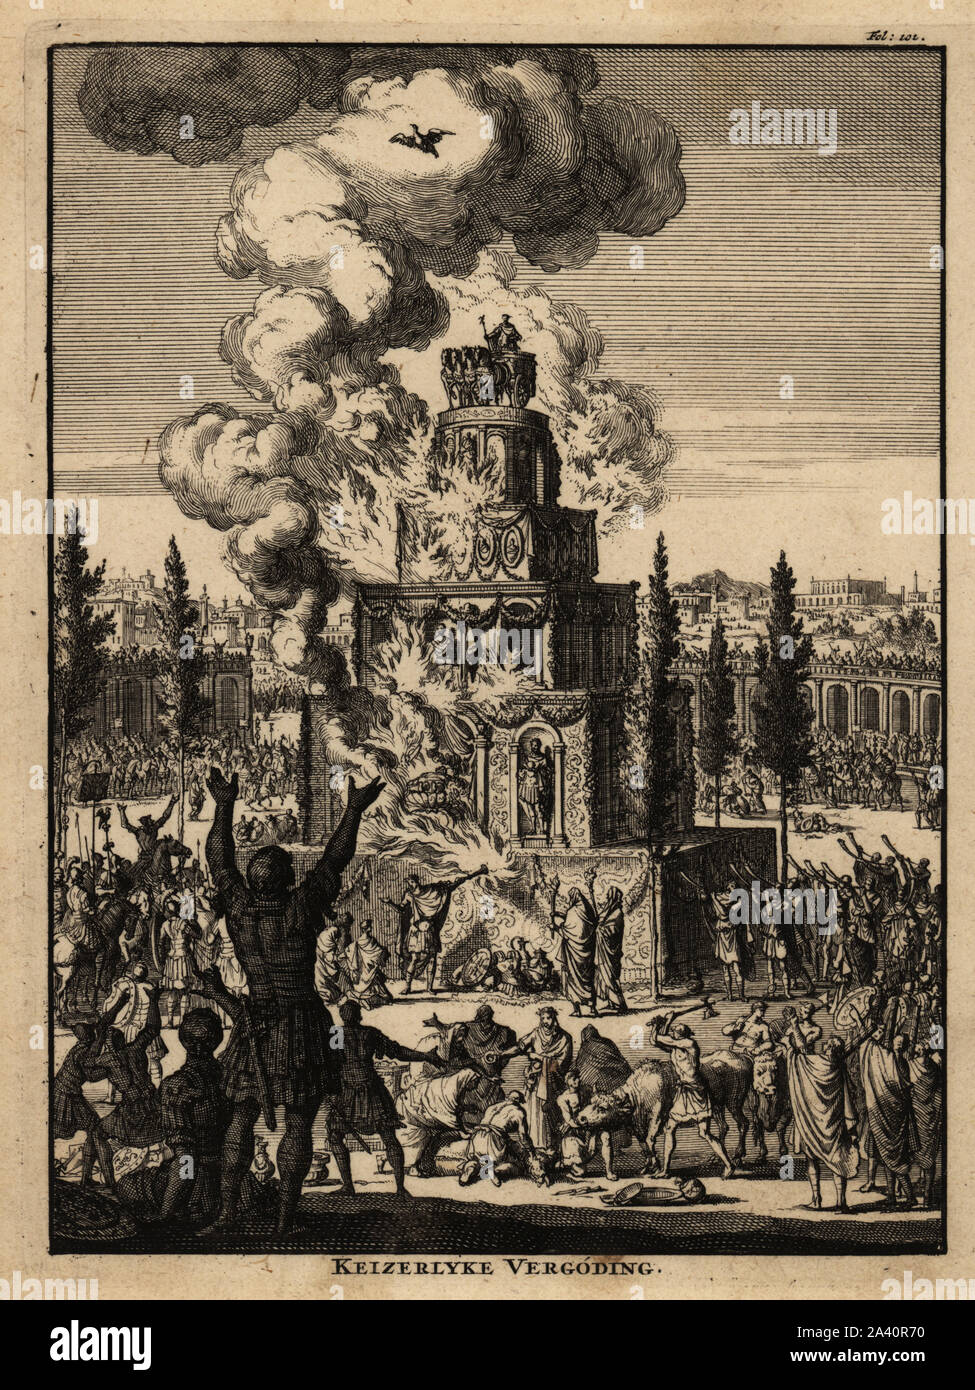 Five-story funeral pyre for a Roman Emperor in flames, Rome. The pyramid is decorated with garlands and statues, crowned with a figure on a quadriga, four-horse chariot. Legionnaires, eagle bearers and centurions grieve, musicians blow horns, men sacrifice bulls. Copperplate engraving by Jan Luyken from Abraham Bogaert’s De Roomsche Monarchy, The Roman Monarchy, Francois Salma, Utrecht, 1697. Stock Photo